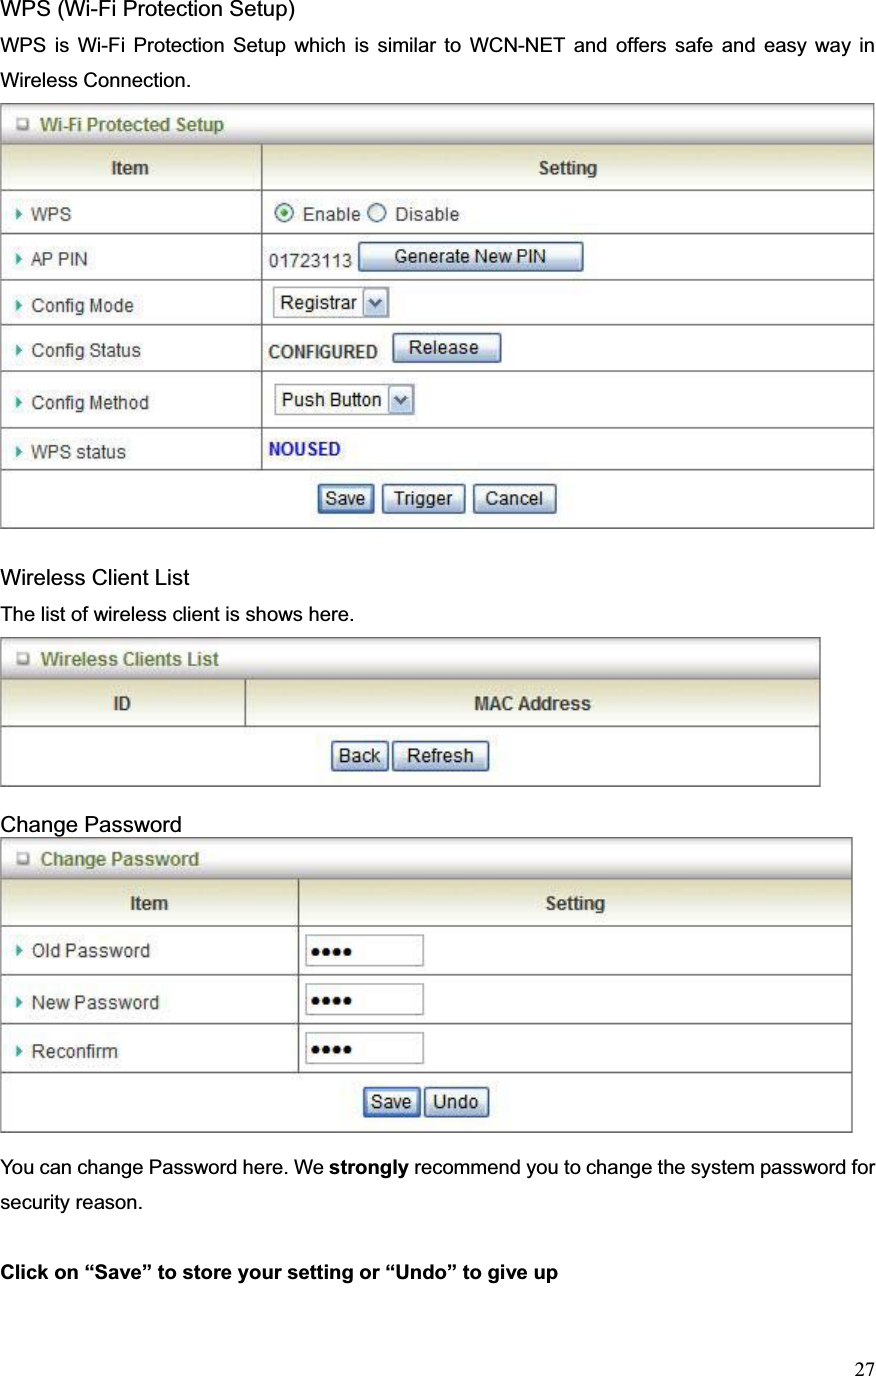 27WPS (Wi-Fi Protection Setup) WPS is Wi-Fi Protection Setup which is similar to WCN-NET and offers safe and easy way in Wireless Connection.   Wireless Client List The list of wireless client is shows here. Change Password You can change Password here. We strongly recommend you to change the system password for security reason. Click on “Save” to store your setting or “Undo” to give up   